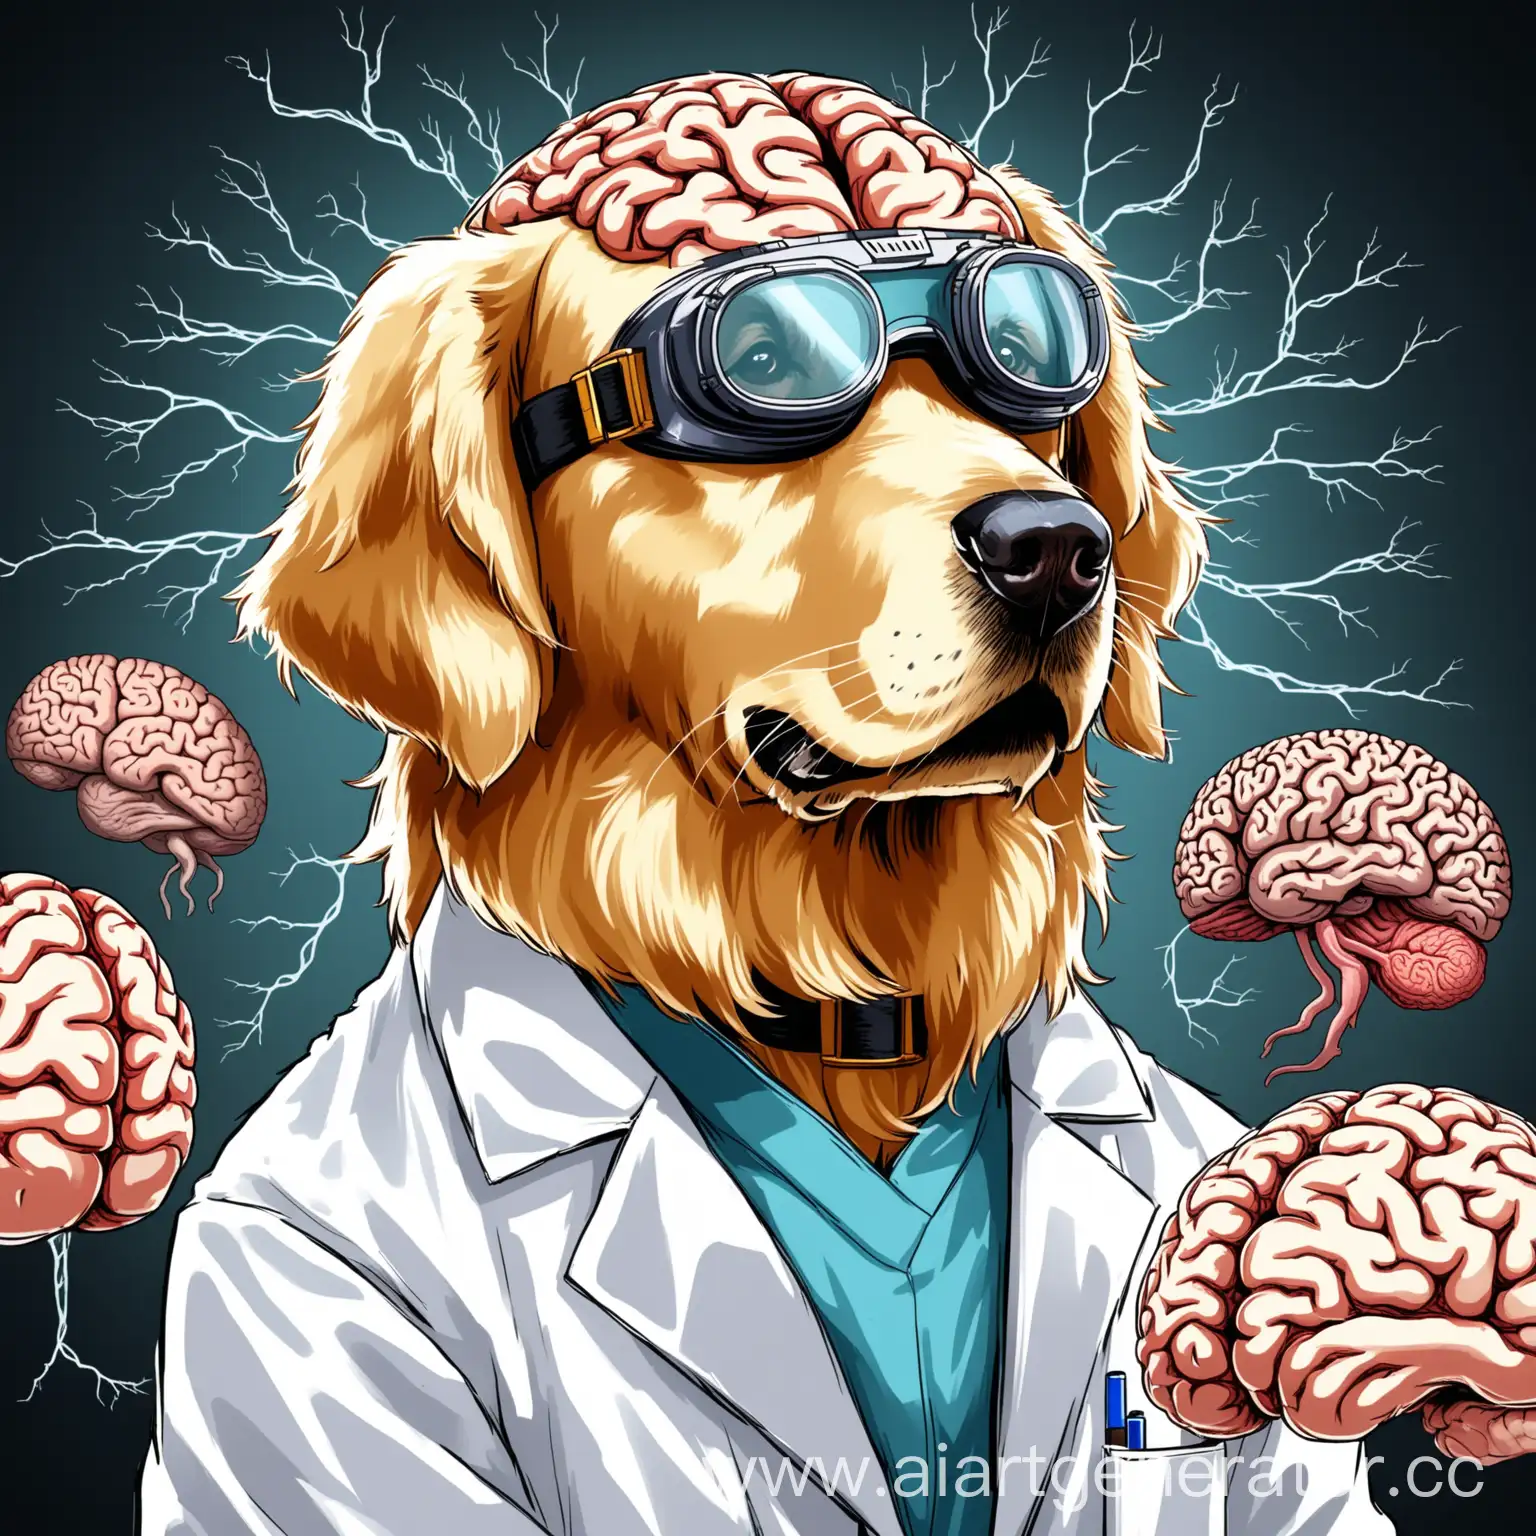 Intelligent-Golden-Retriever-in-Lab-Coat-with-Protective-Goggles